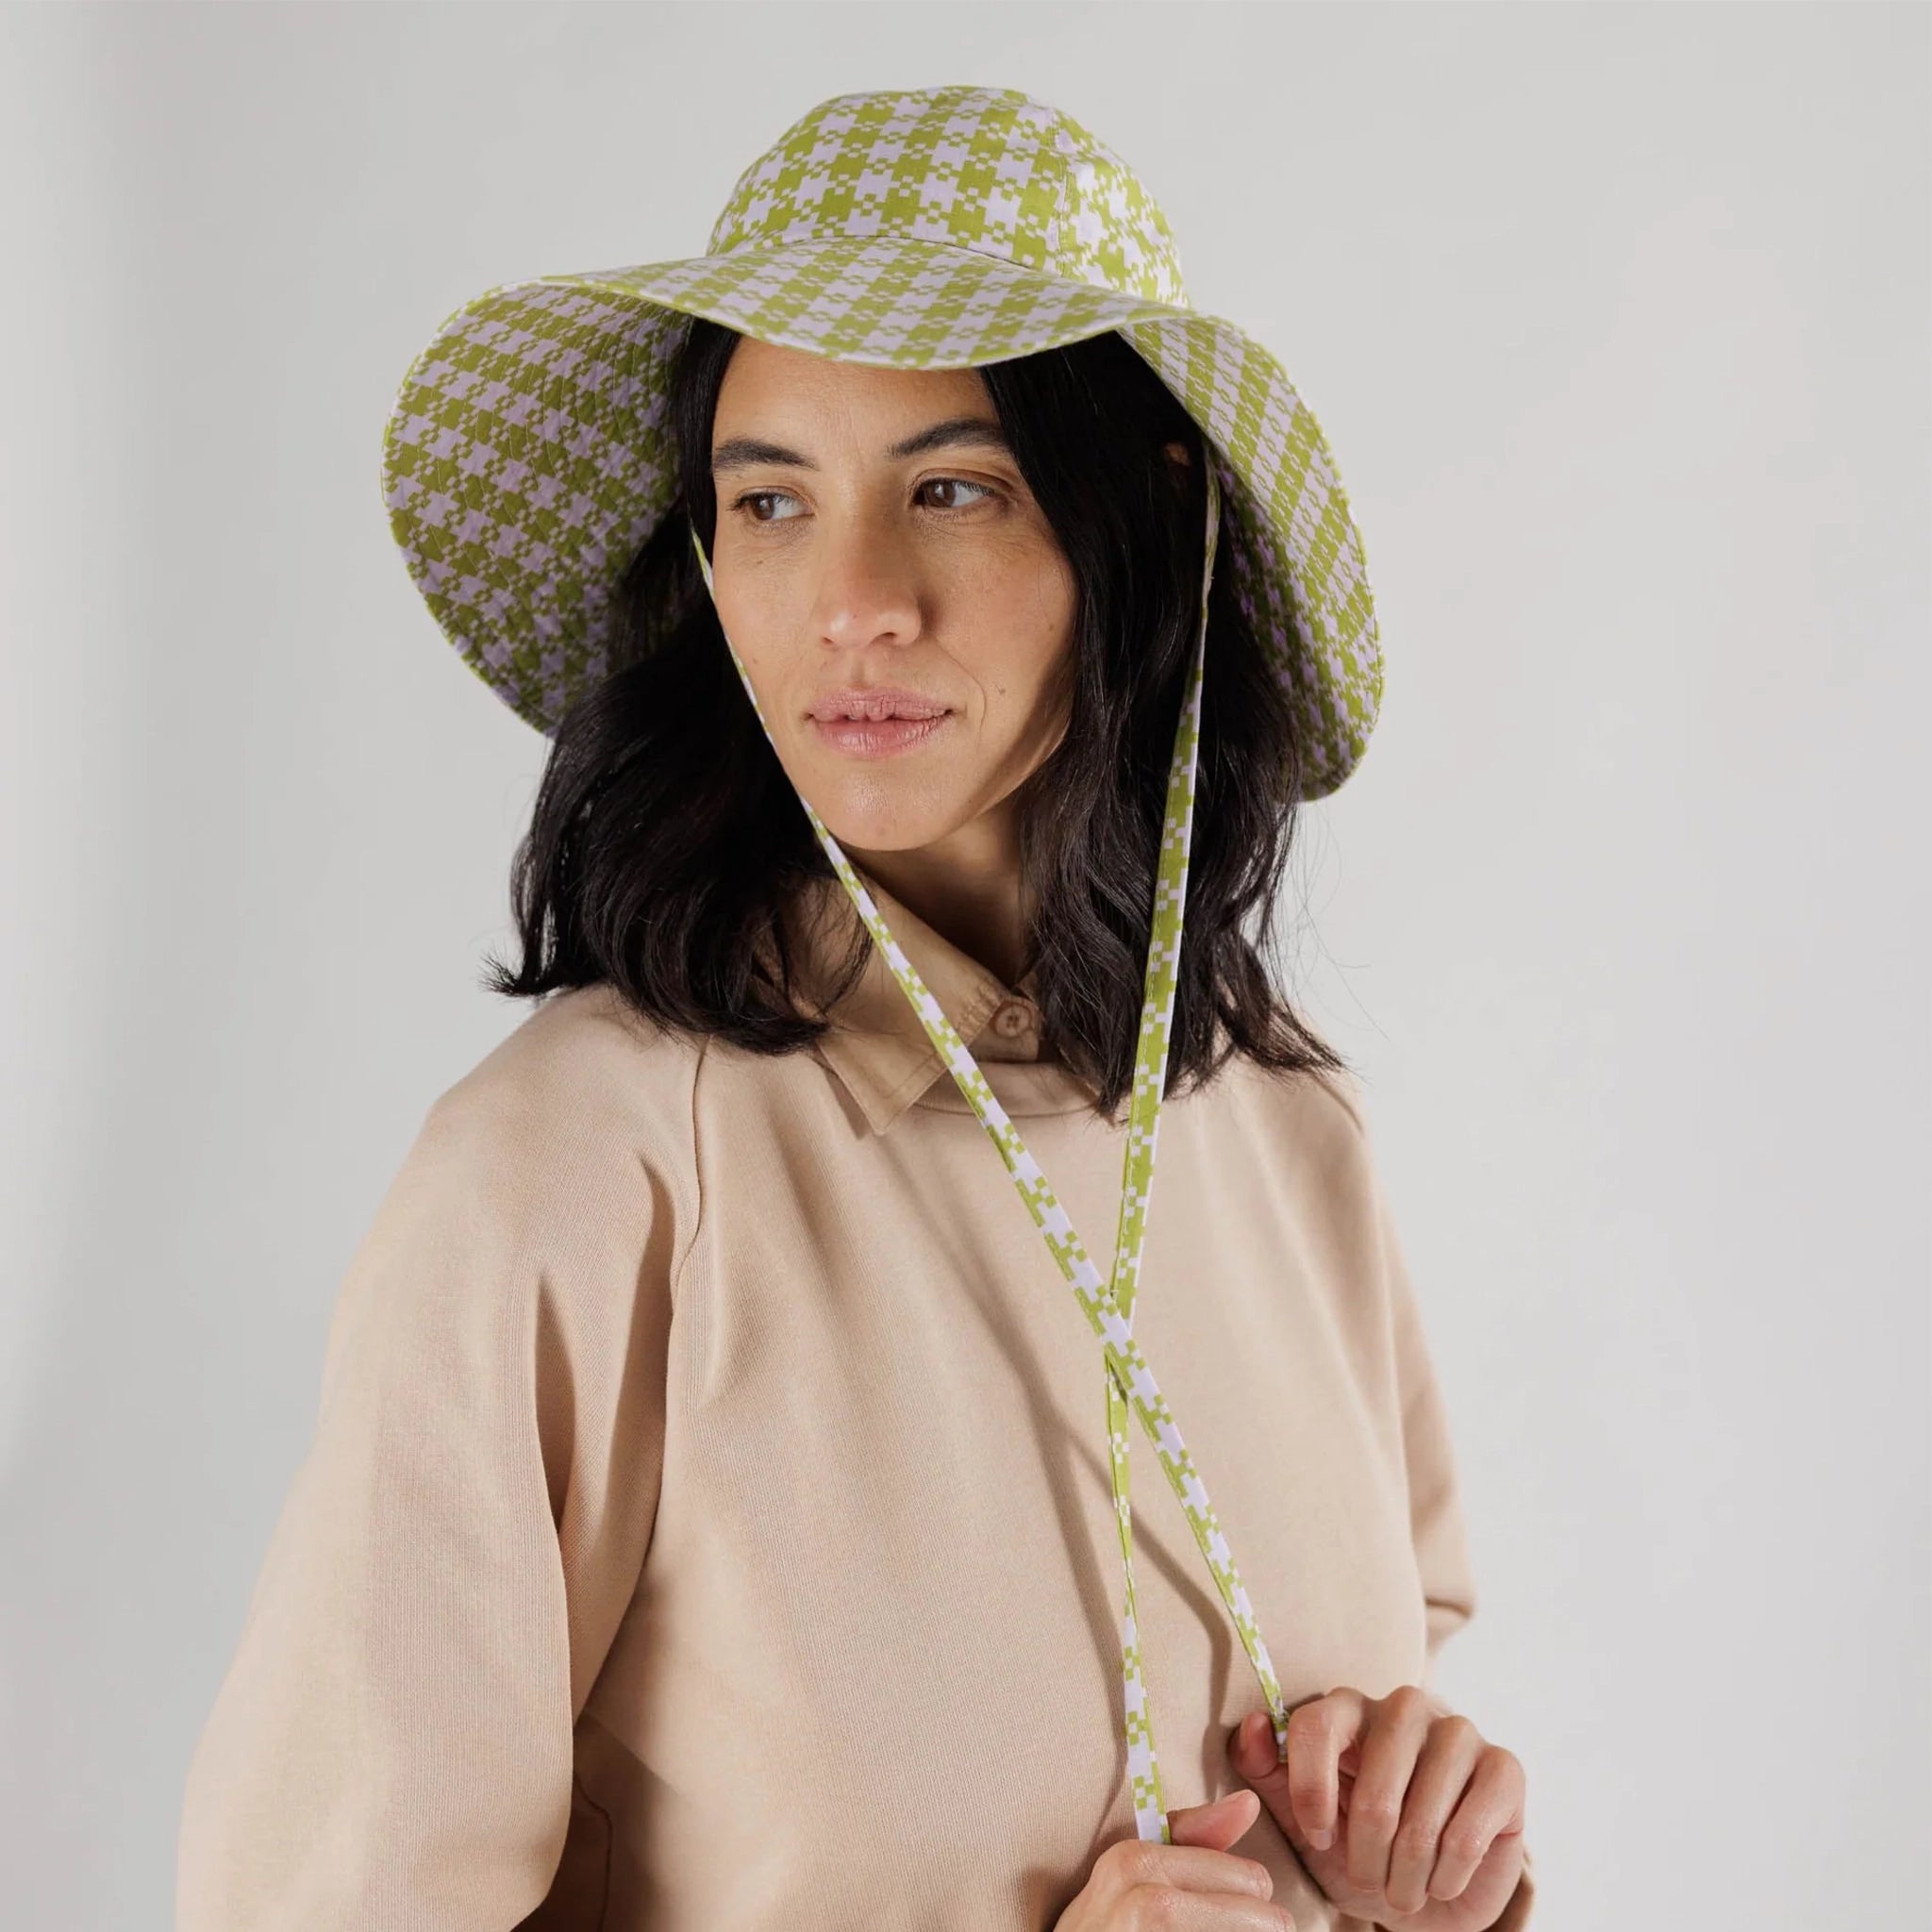 On a white background is a pink and green flexible sun hat with to straps for securing around the neck. 